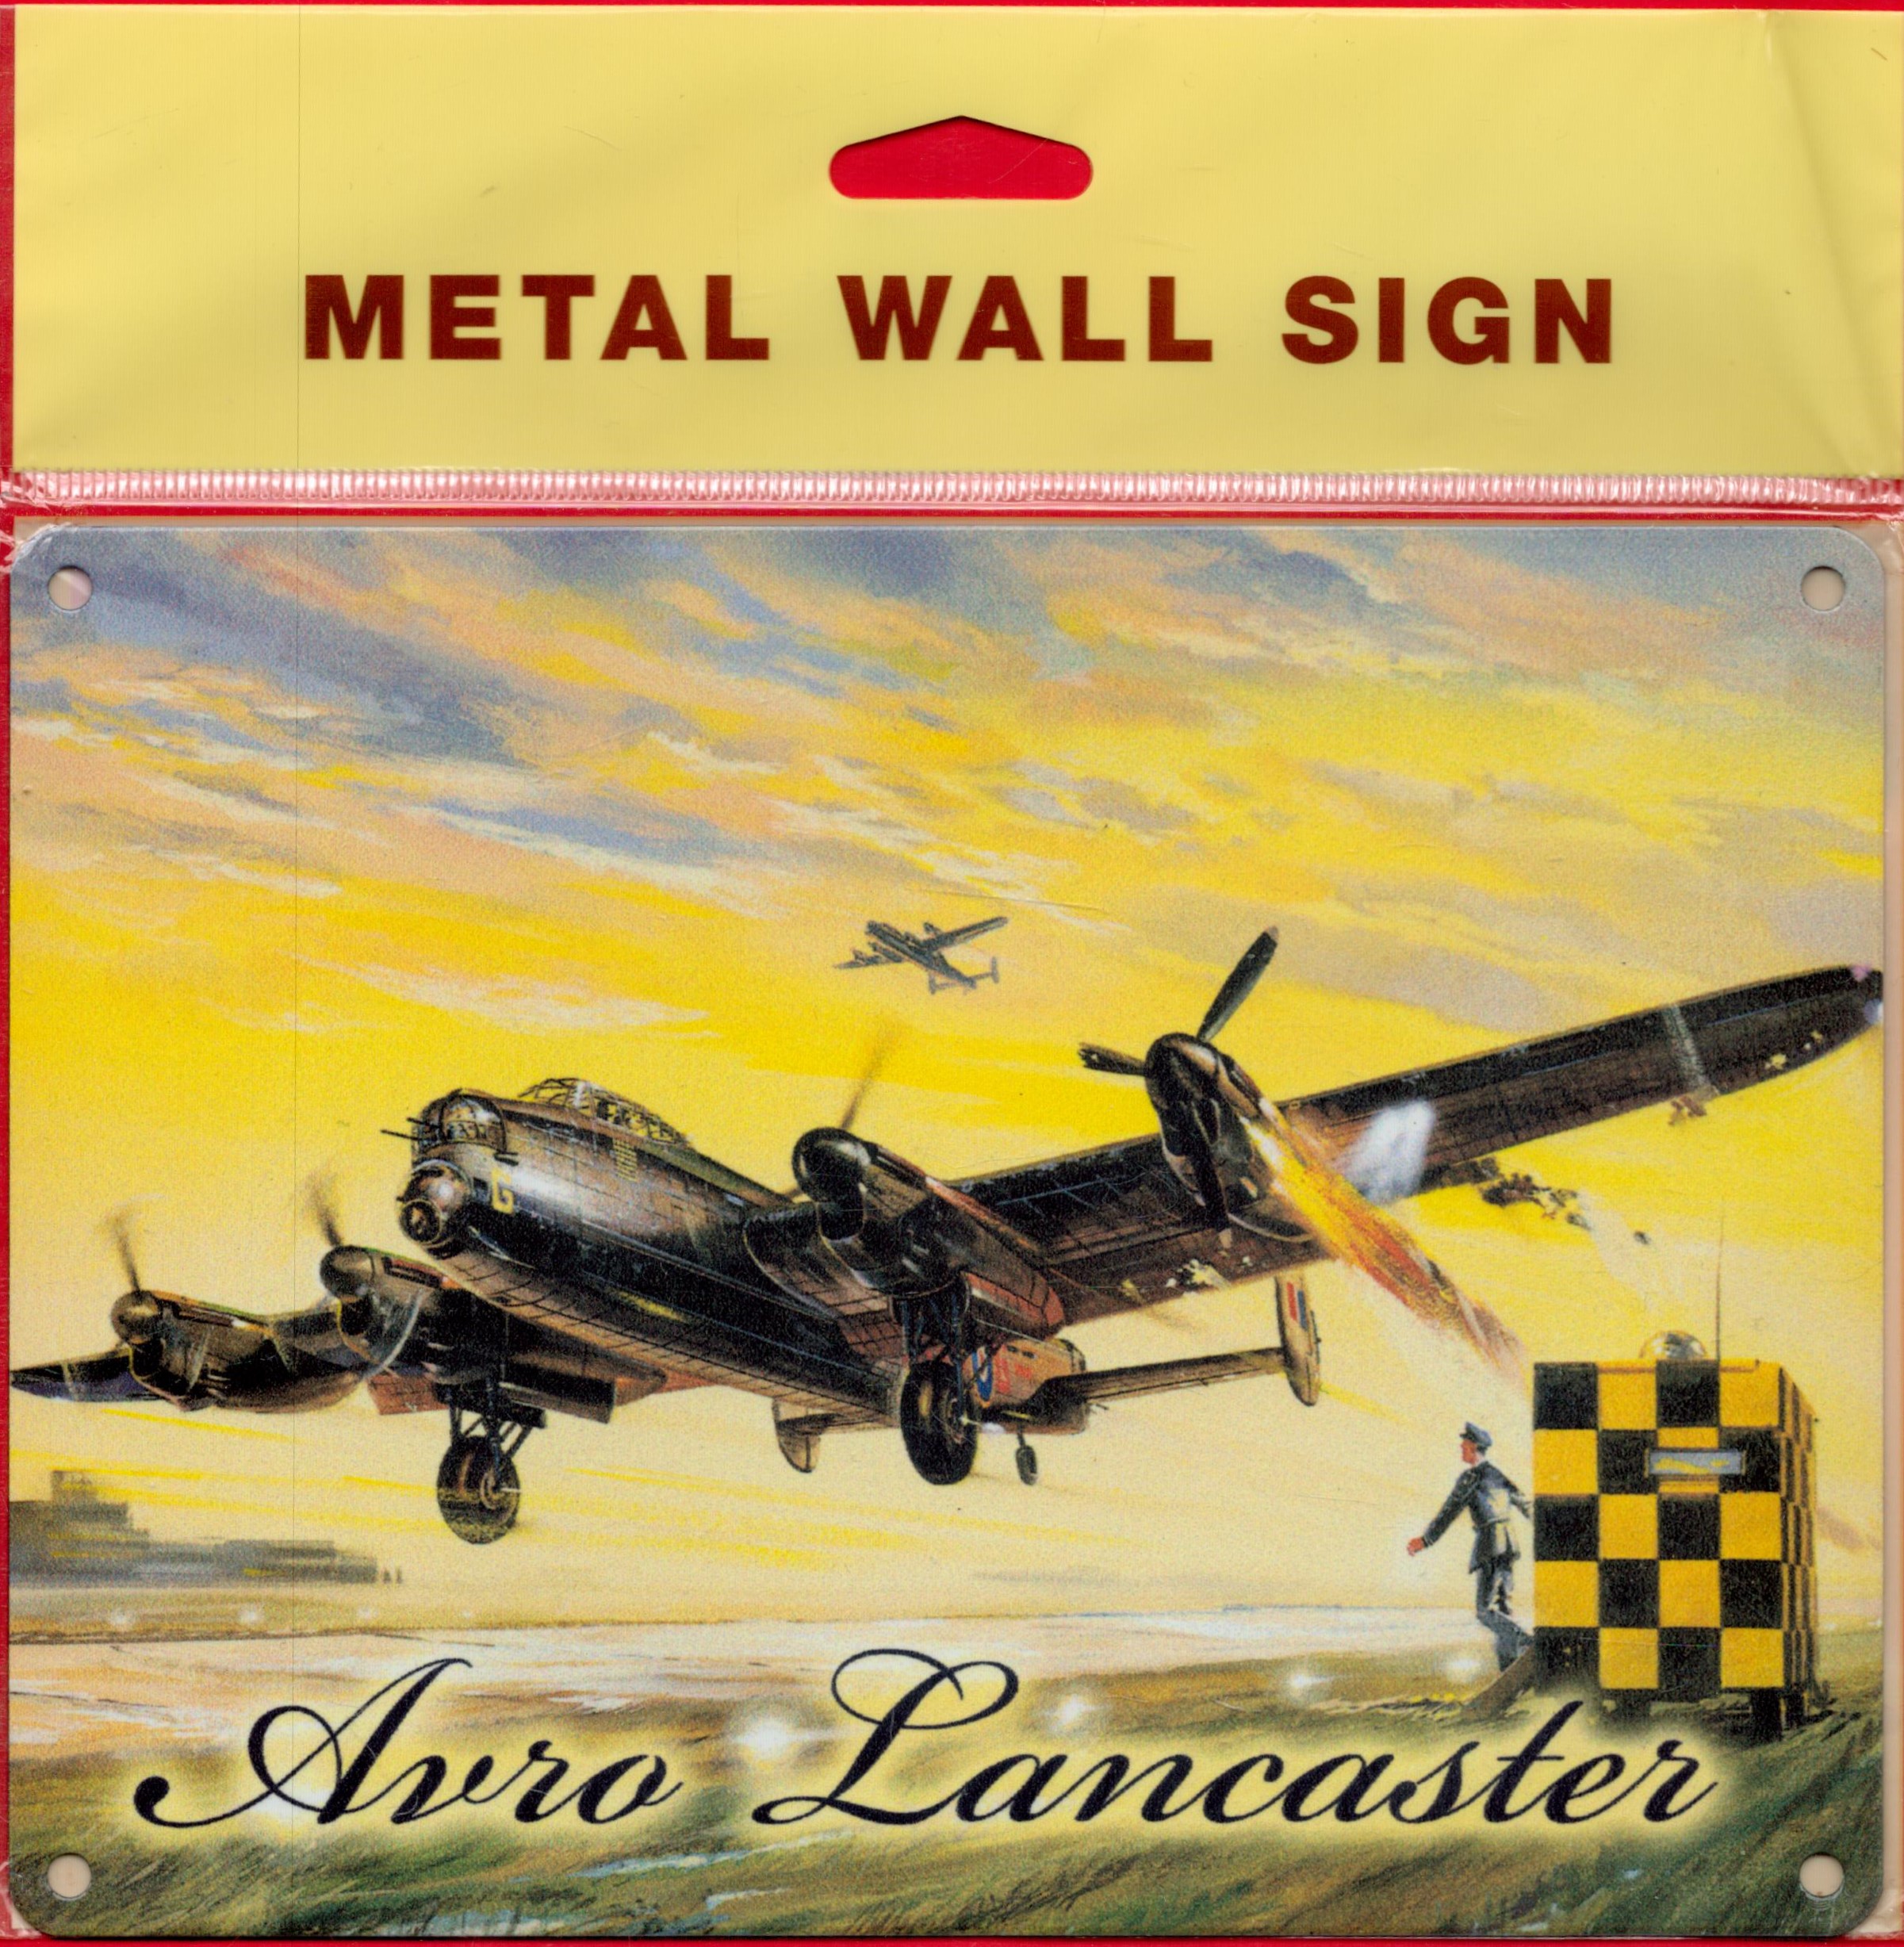 Avro Lancaster Metal Wall Sign approx size 6 x 8 made by The Original Metal Sign Co UK with an image